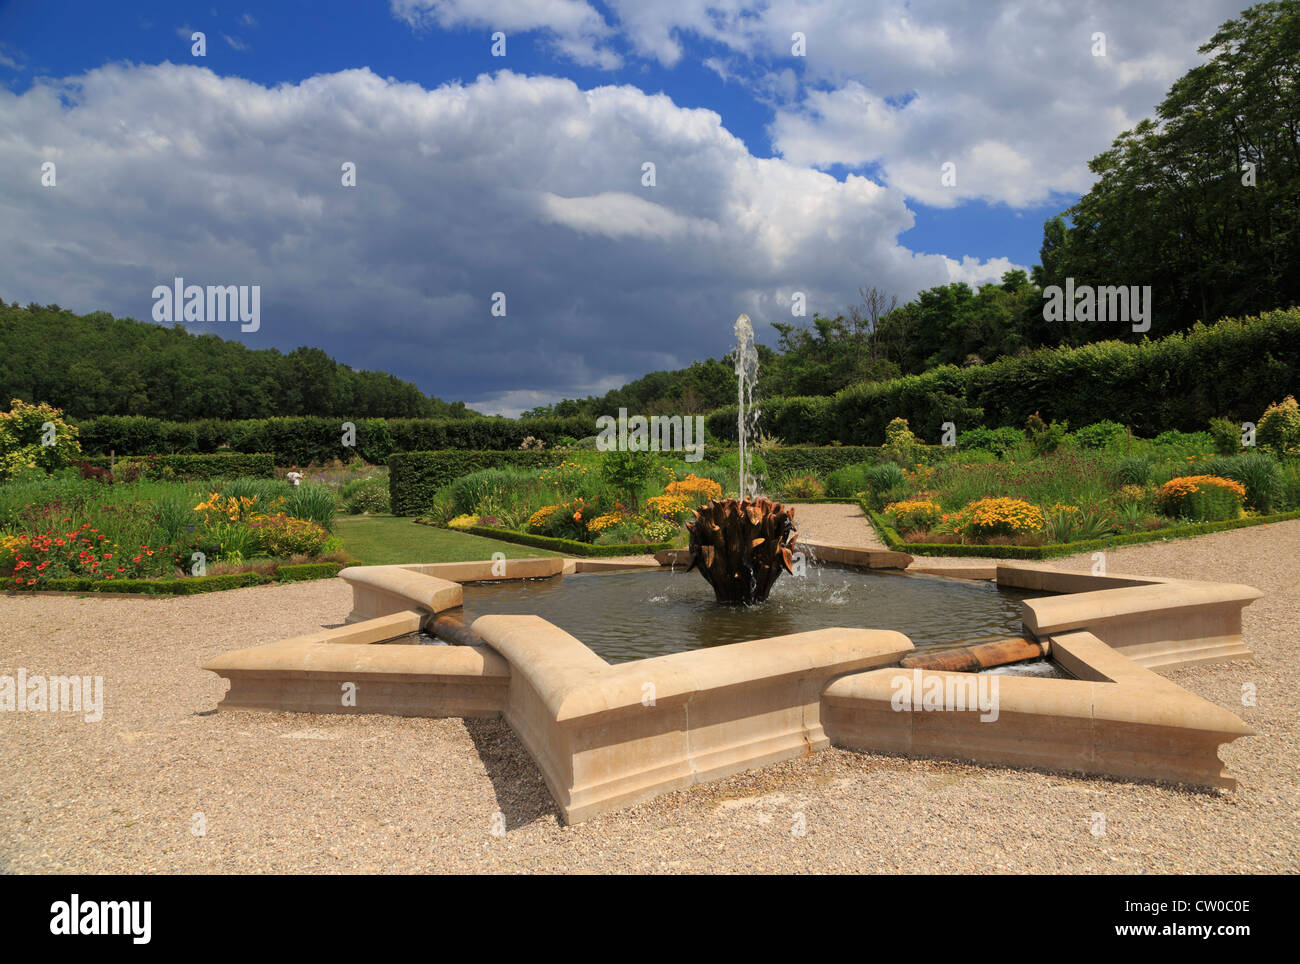 The Sun Garden, Chateau de Villandry, Loire Valley. New garden in the grounds of the chateau. Opened in 2008. Stock Photo